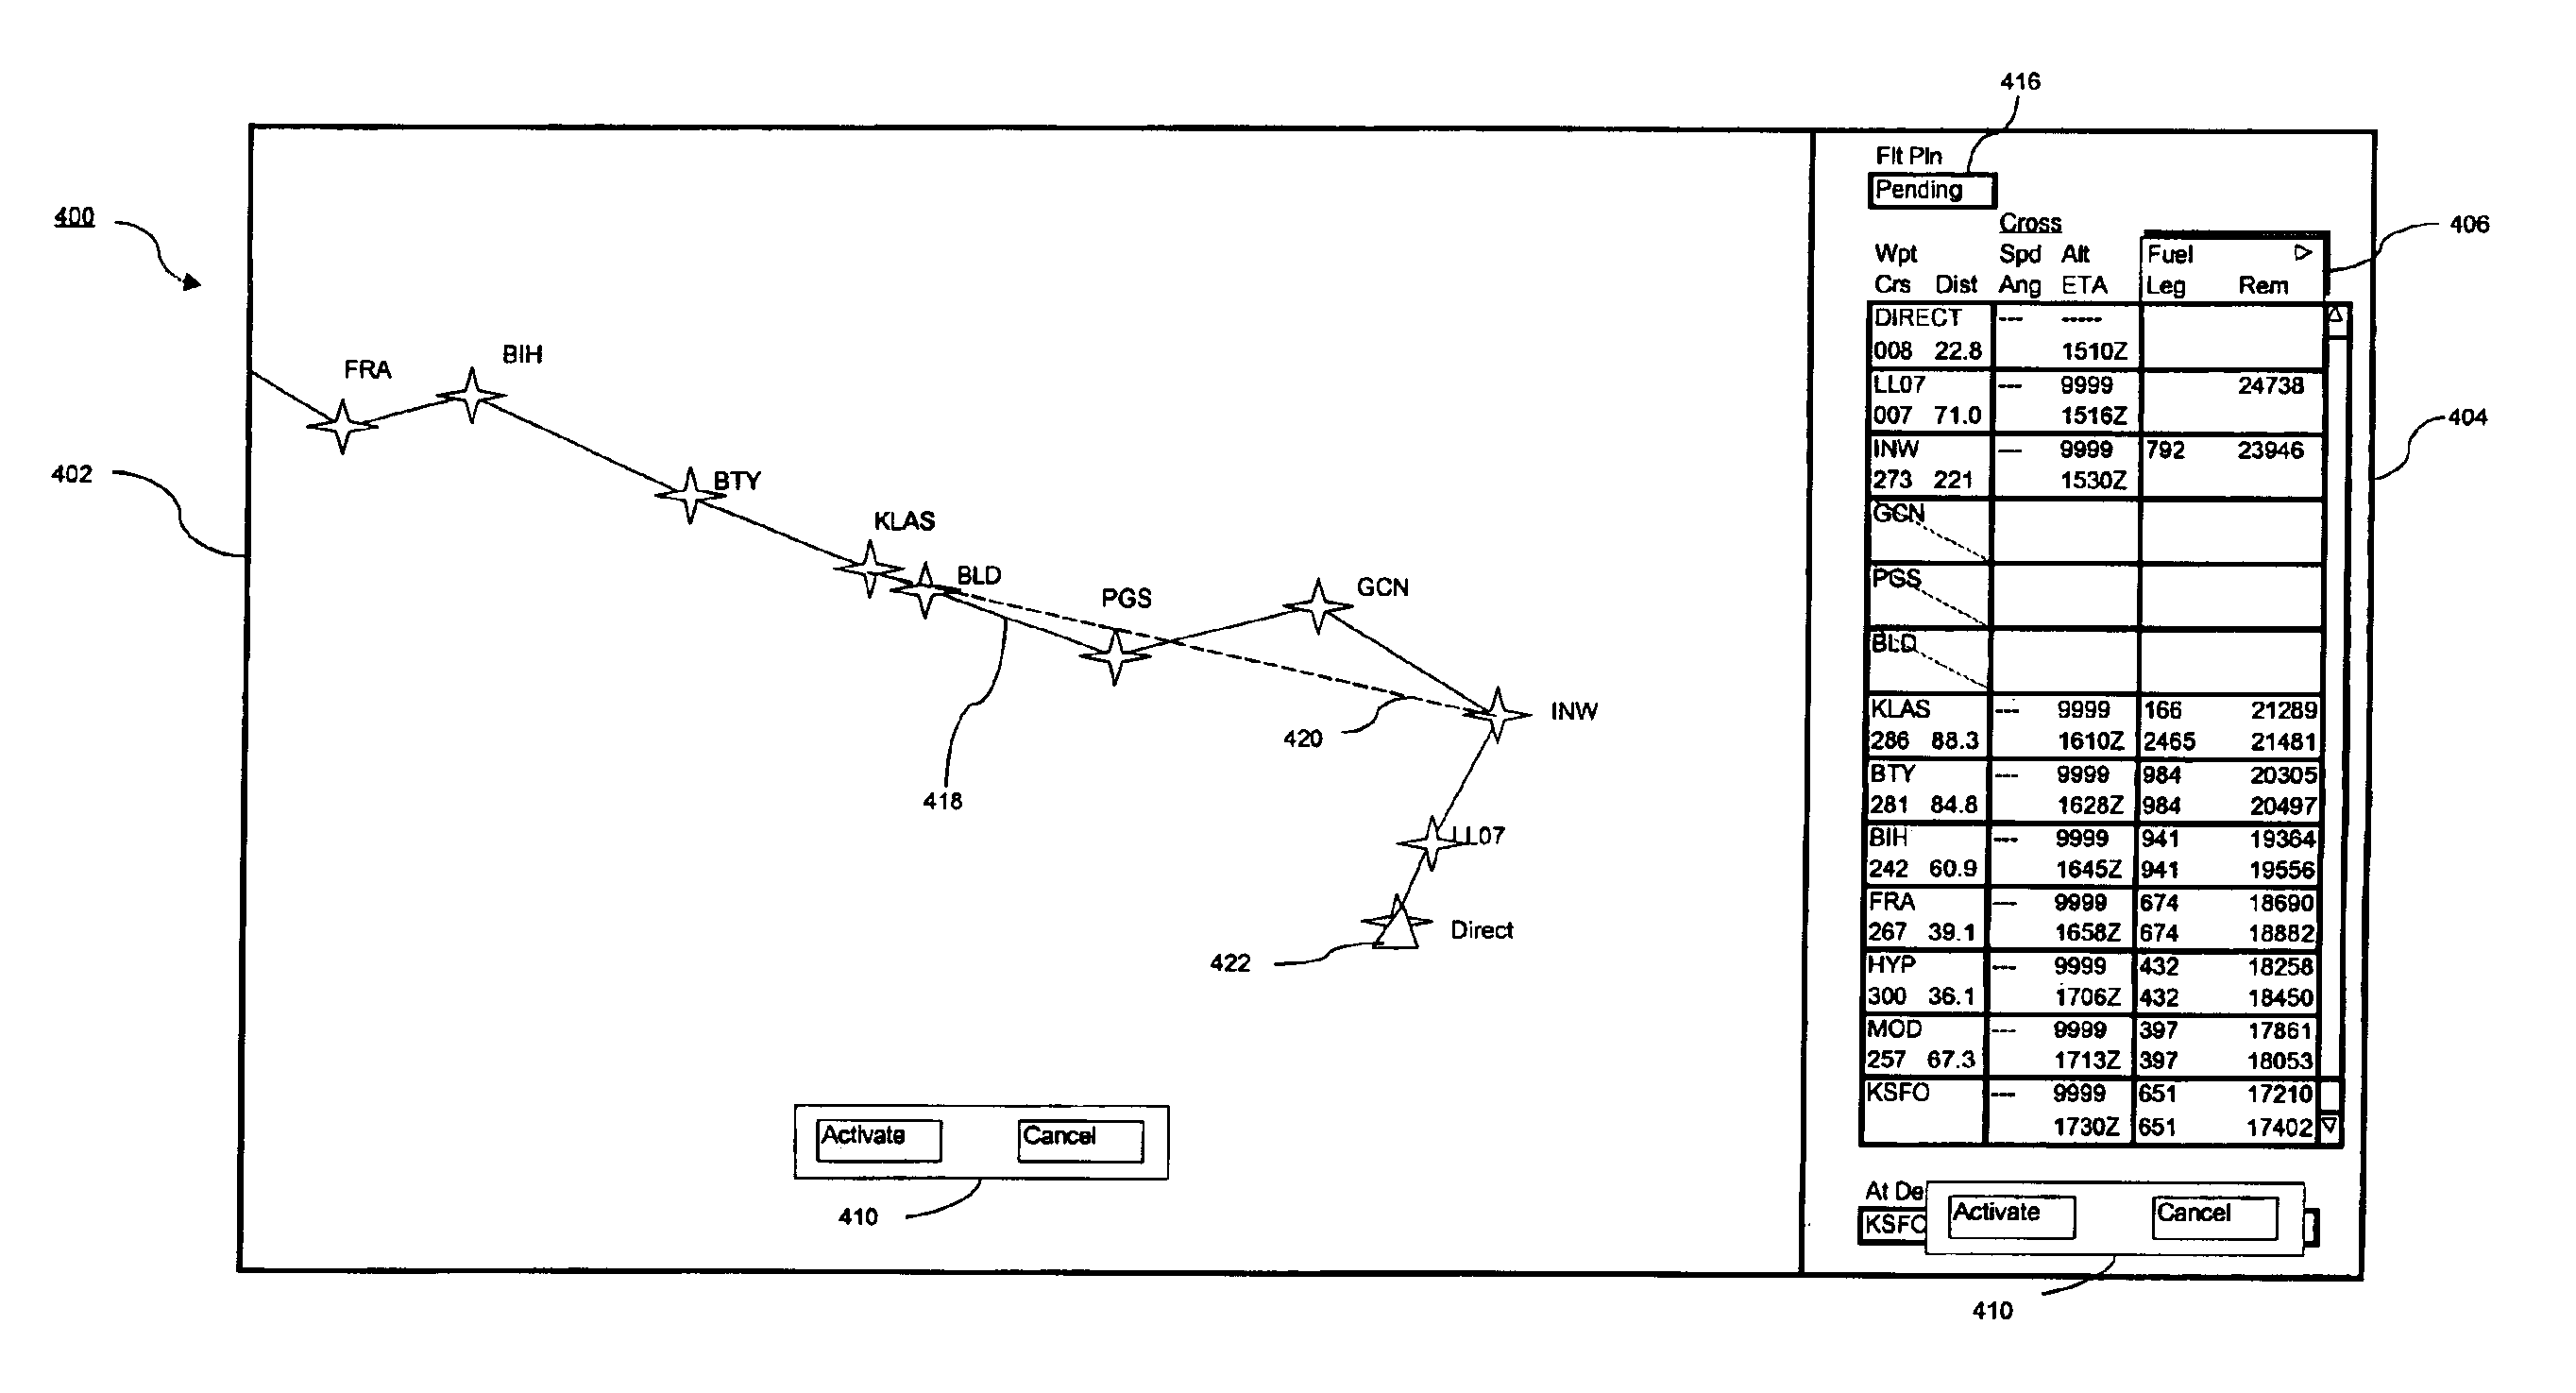 System and method for textually displaying an original flight plan and a modified flight plan simultaneously